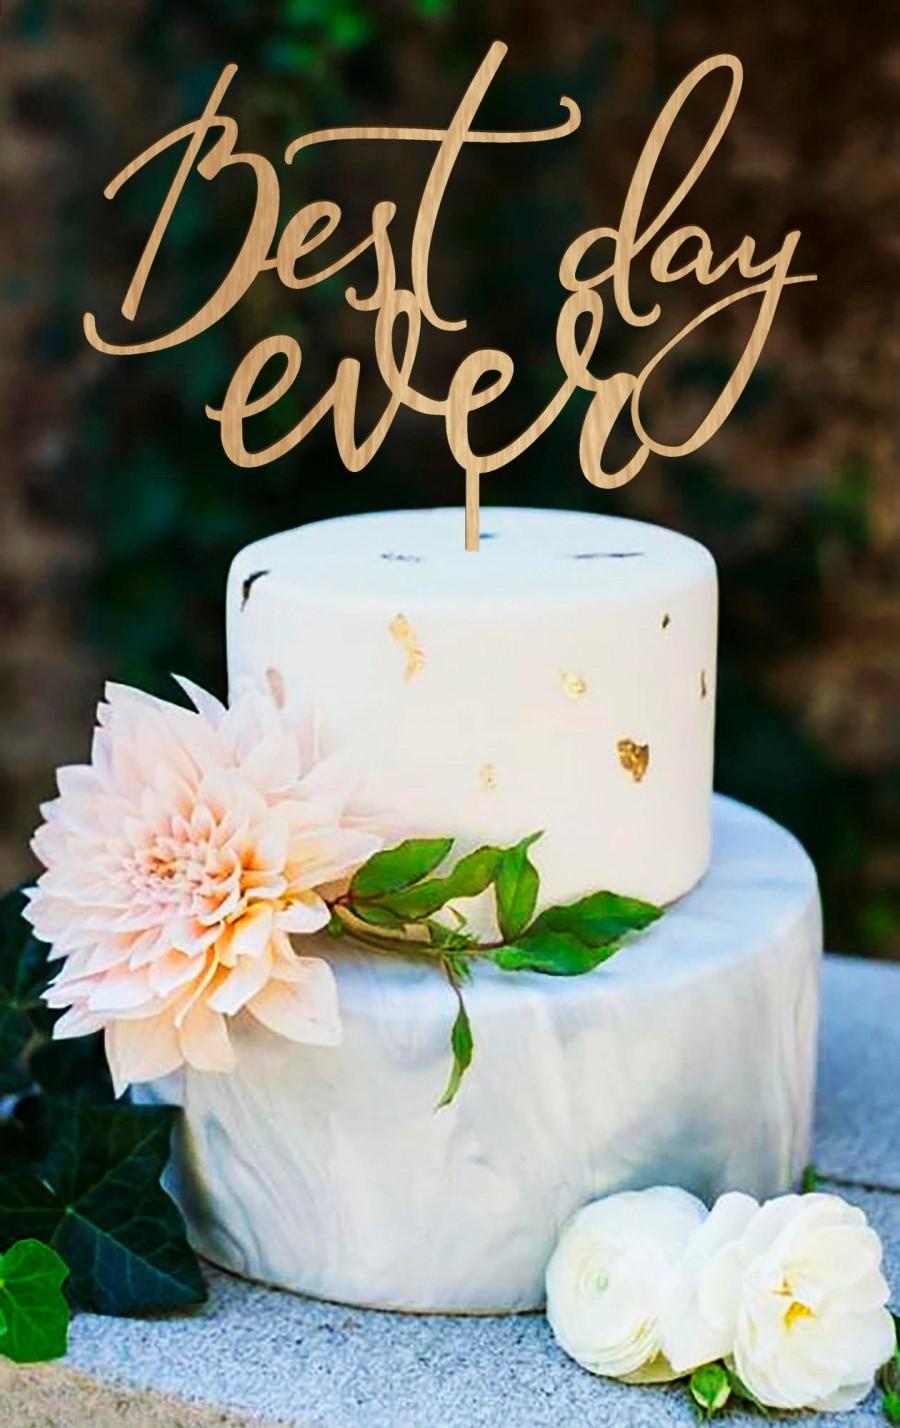 Mariage - Wedding Cake Topper, Best Day Ever, Cake Topper, Custom Cake Topper, Rustic Cake Topper, Gold Cake Topper, Best Day Ever, Wedding Topper